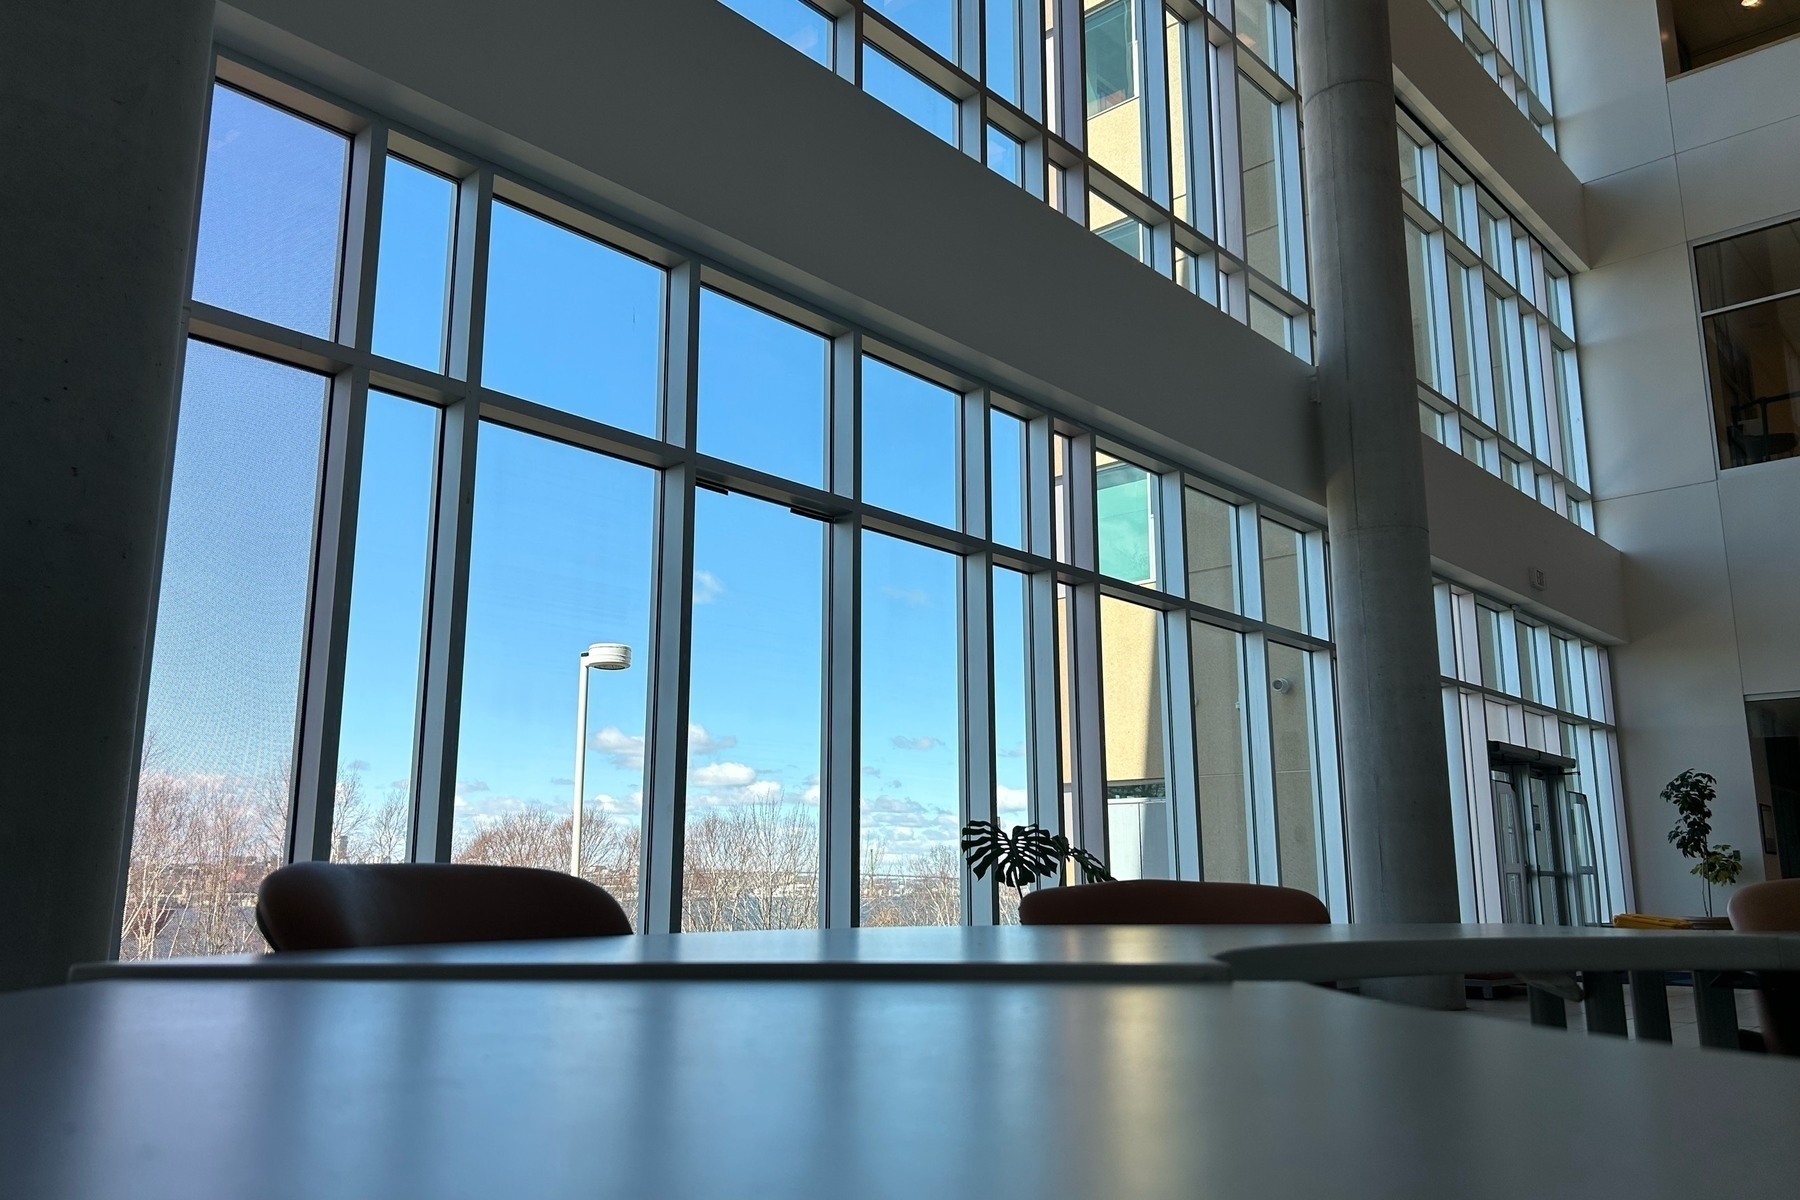 Windows with a blue sky behind them and a grey tabletop in the foreground.